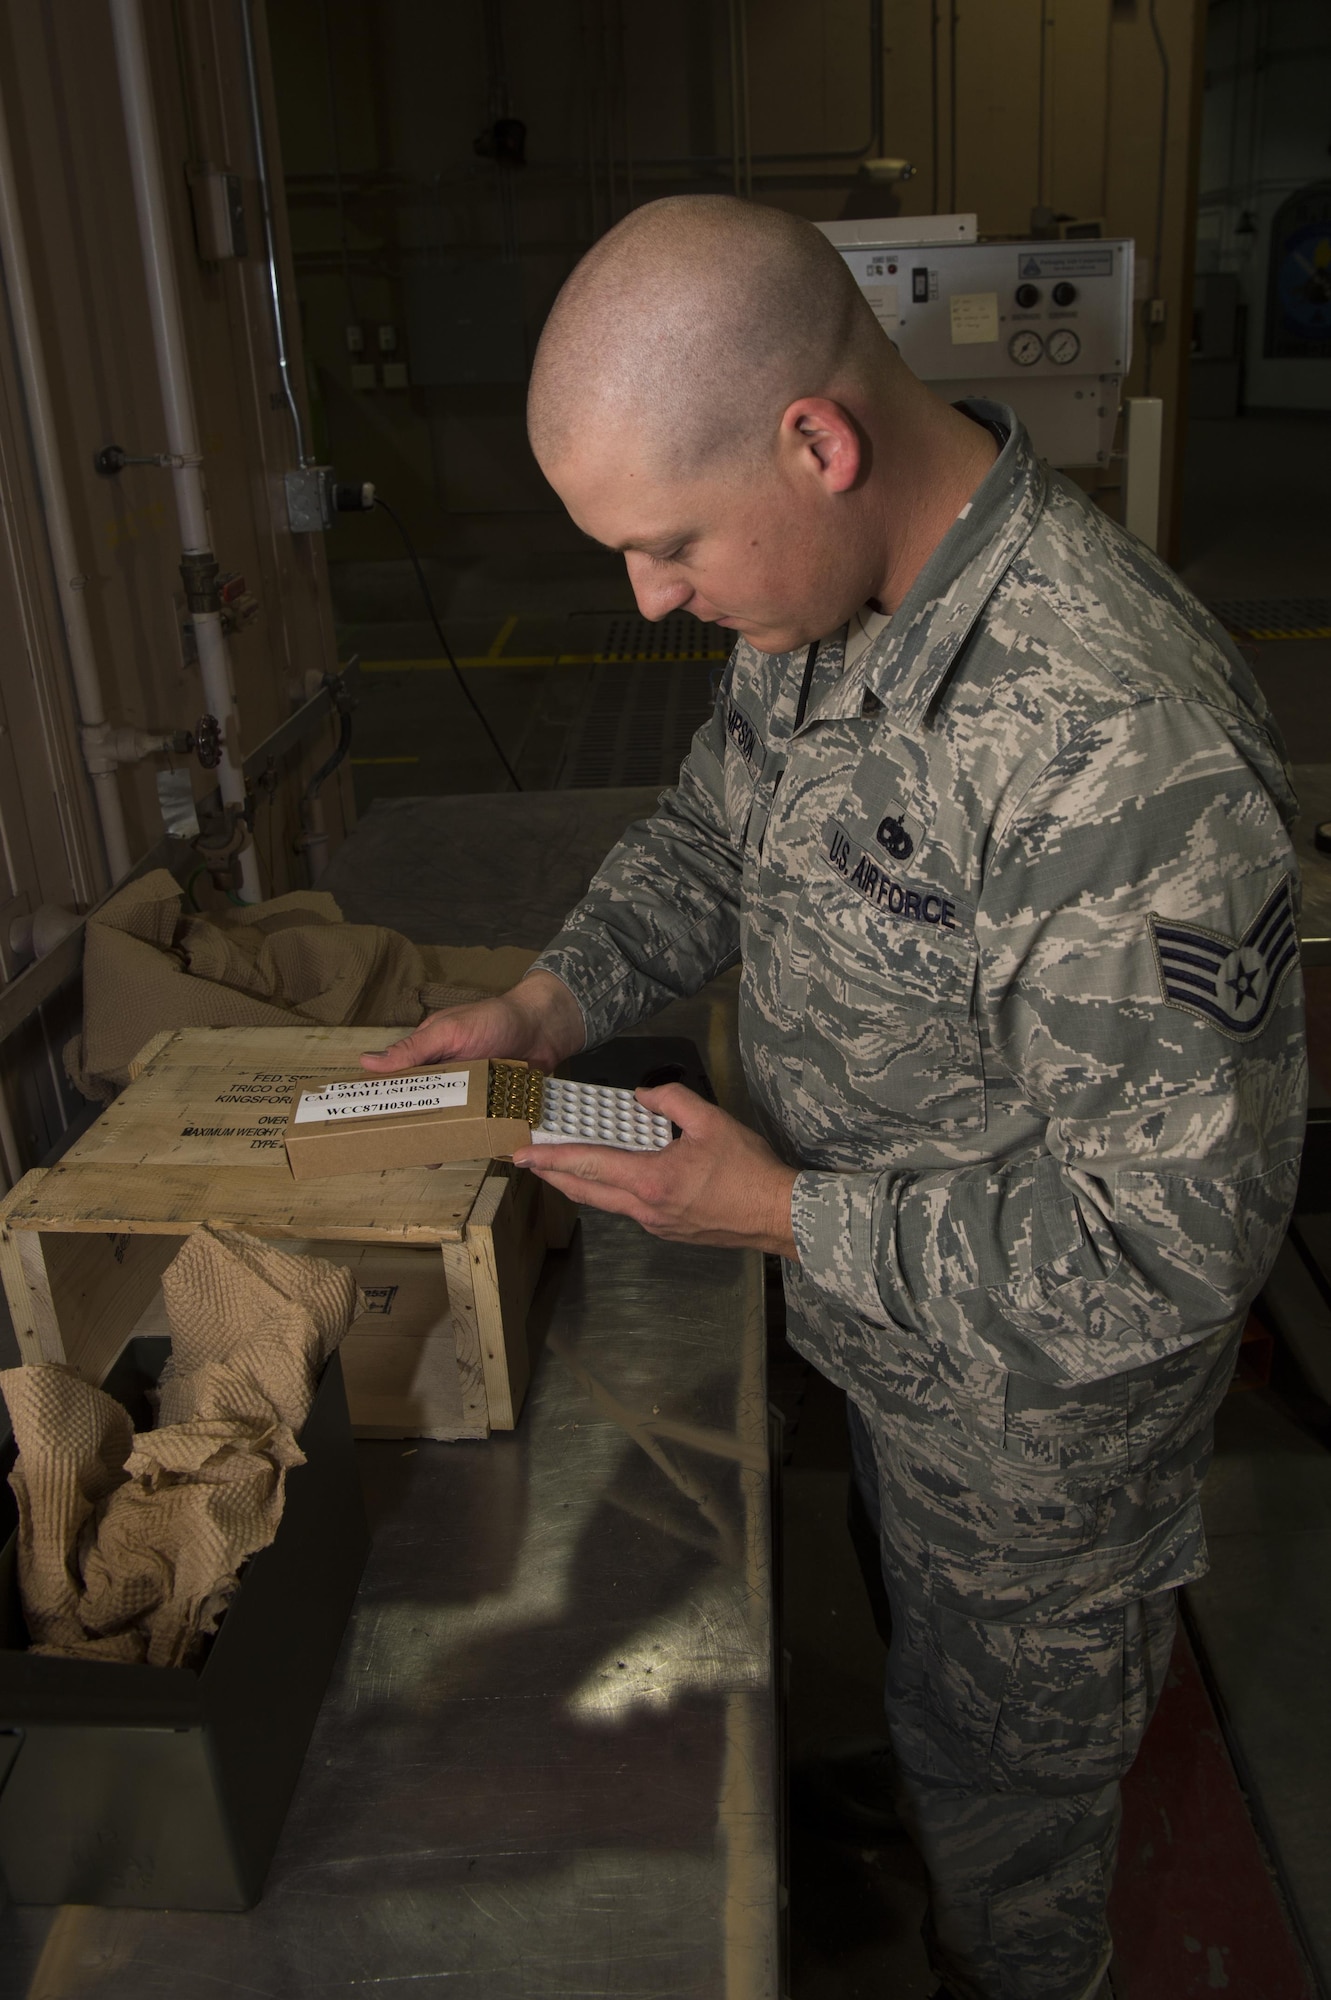 Staff Sgt. Bryan Thompson, 90th Munition Squadron munitions operations NCO in charge, performs inventory of 9mm ammunition at F.E. Warren Air Force Base, Wyo., Oct. 31, 2016. The 90th MUNS is responsible for the inventory and tracking of more than 7 million munitions. The 90th MUNS mission is to enable nuclear deterrence by maintaining combat ready munitions in defense of global freedoms safely, securely and effectively. (U.S. Air Force photo by Staff Sgt. Christopher Ruano)